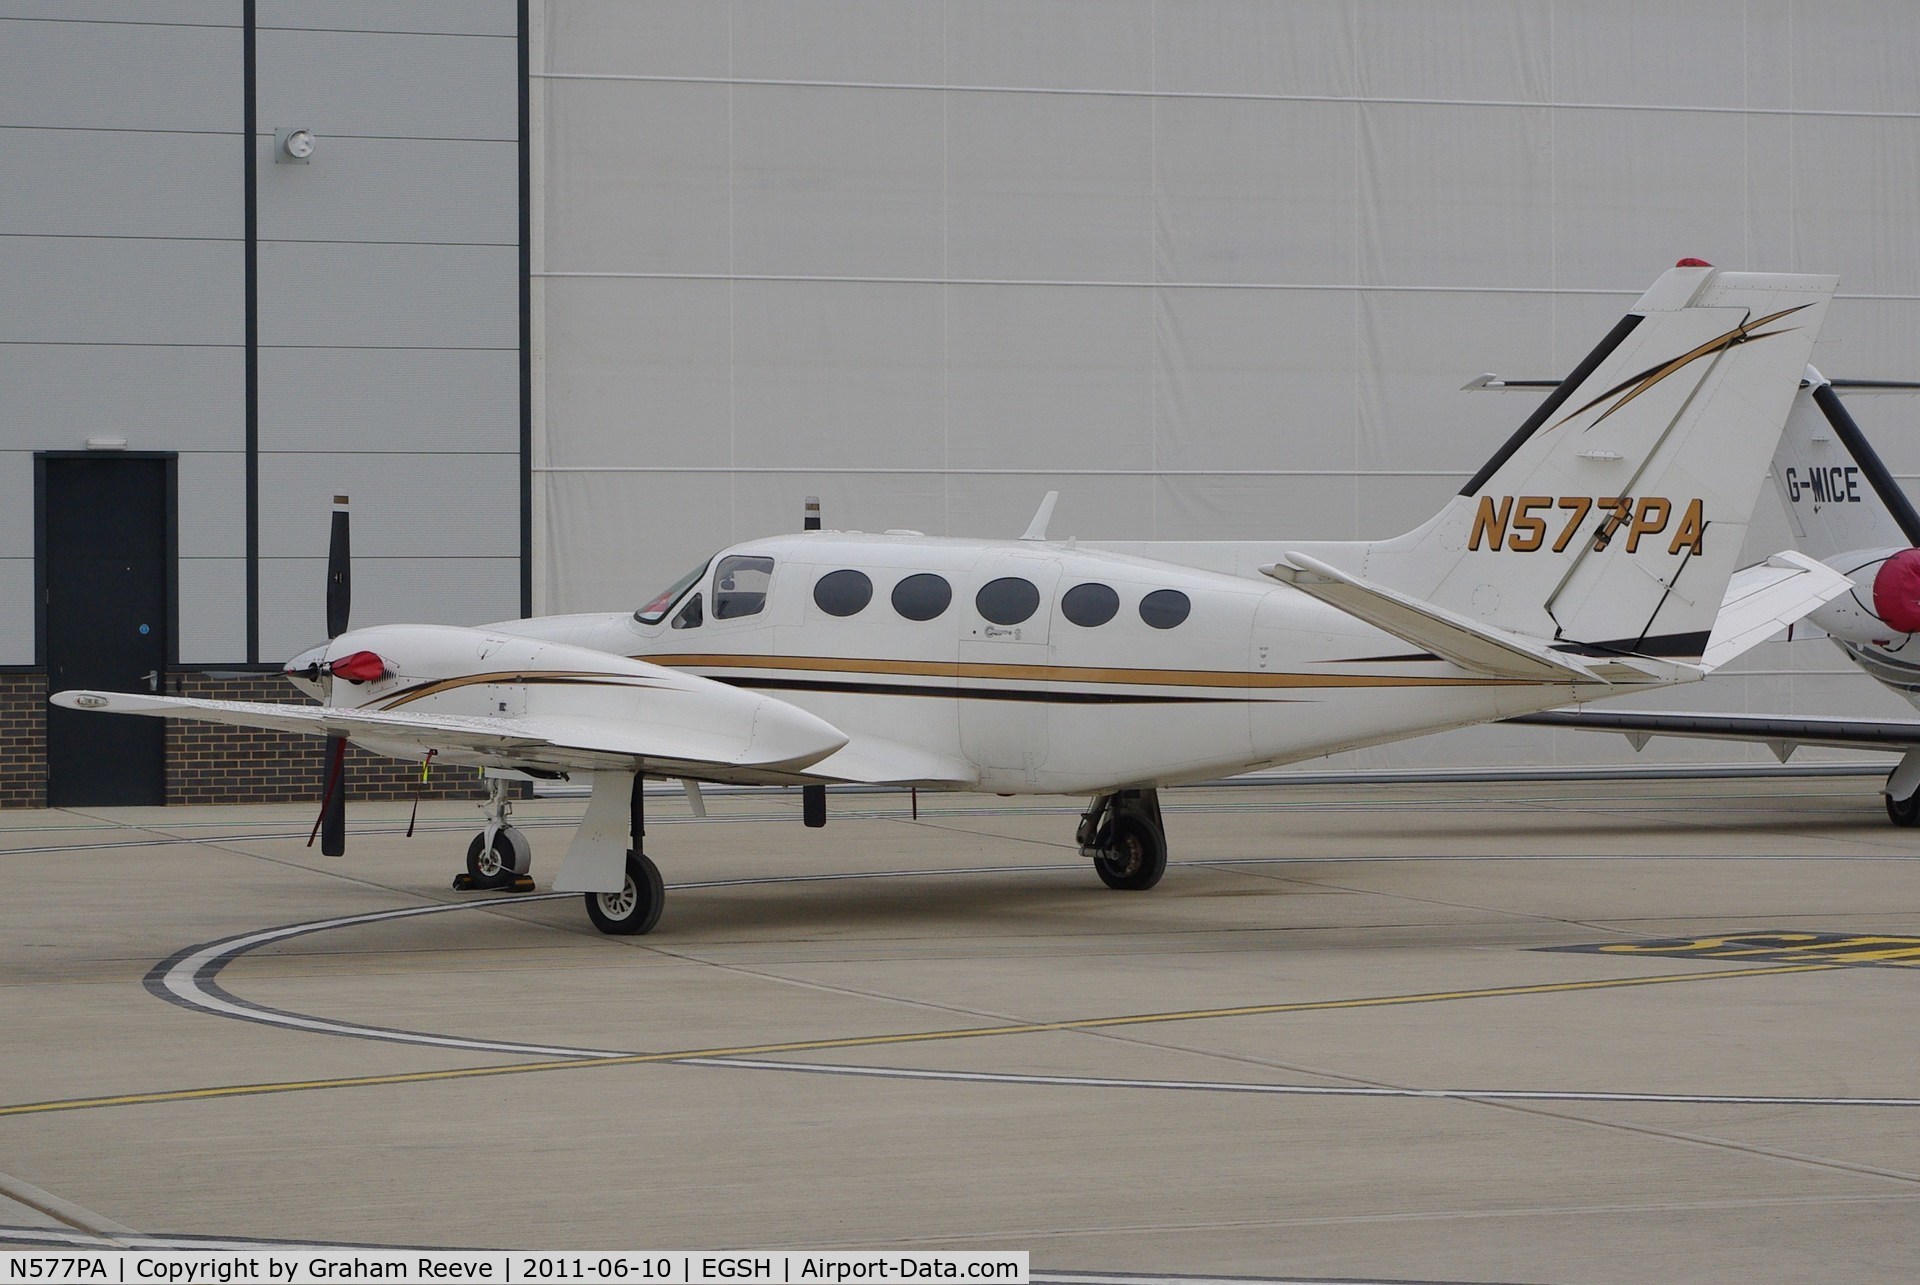 N577PA, 1984 Cessna 425 Conquest I C/N 425-0194, Parked at Norwich.